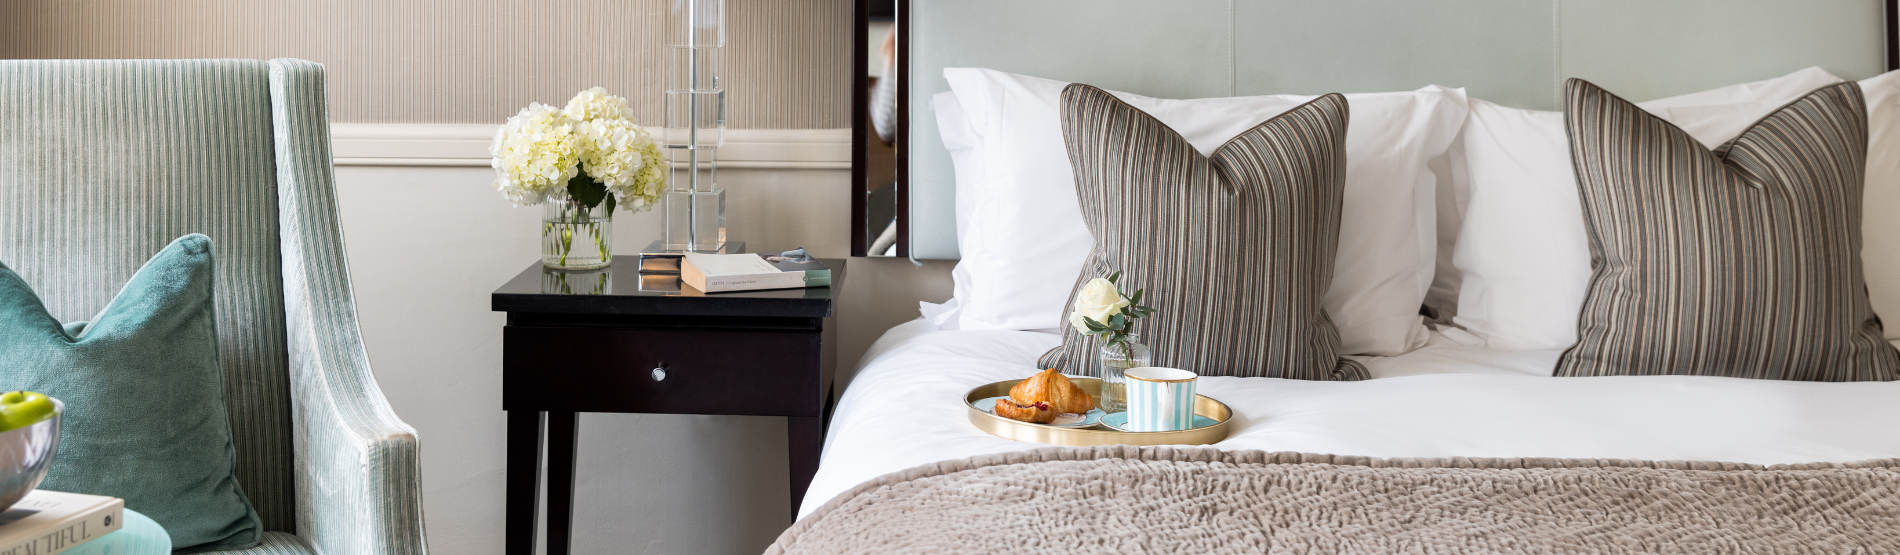 Breakfast in Bed at The Bristol hotel